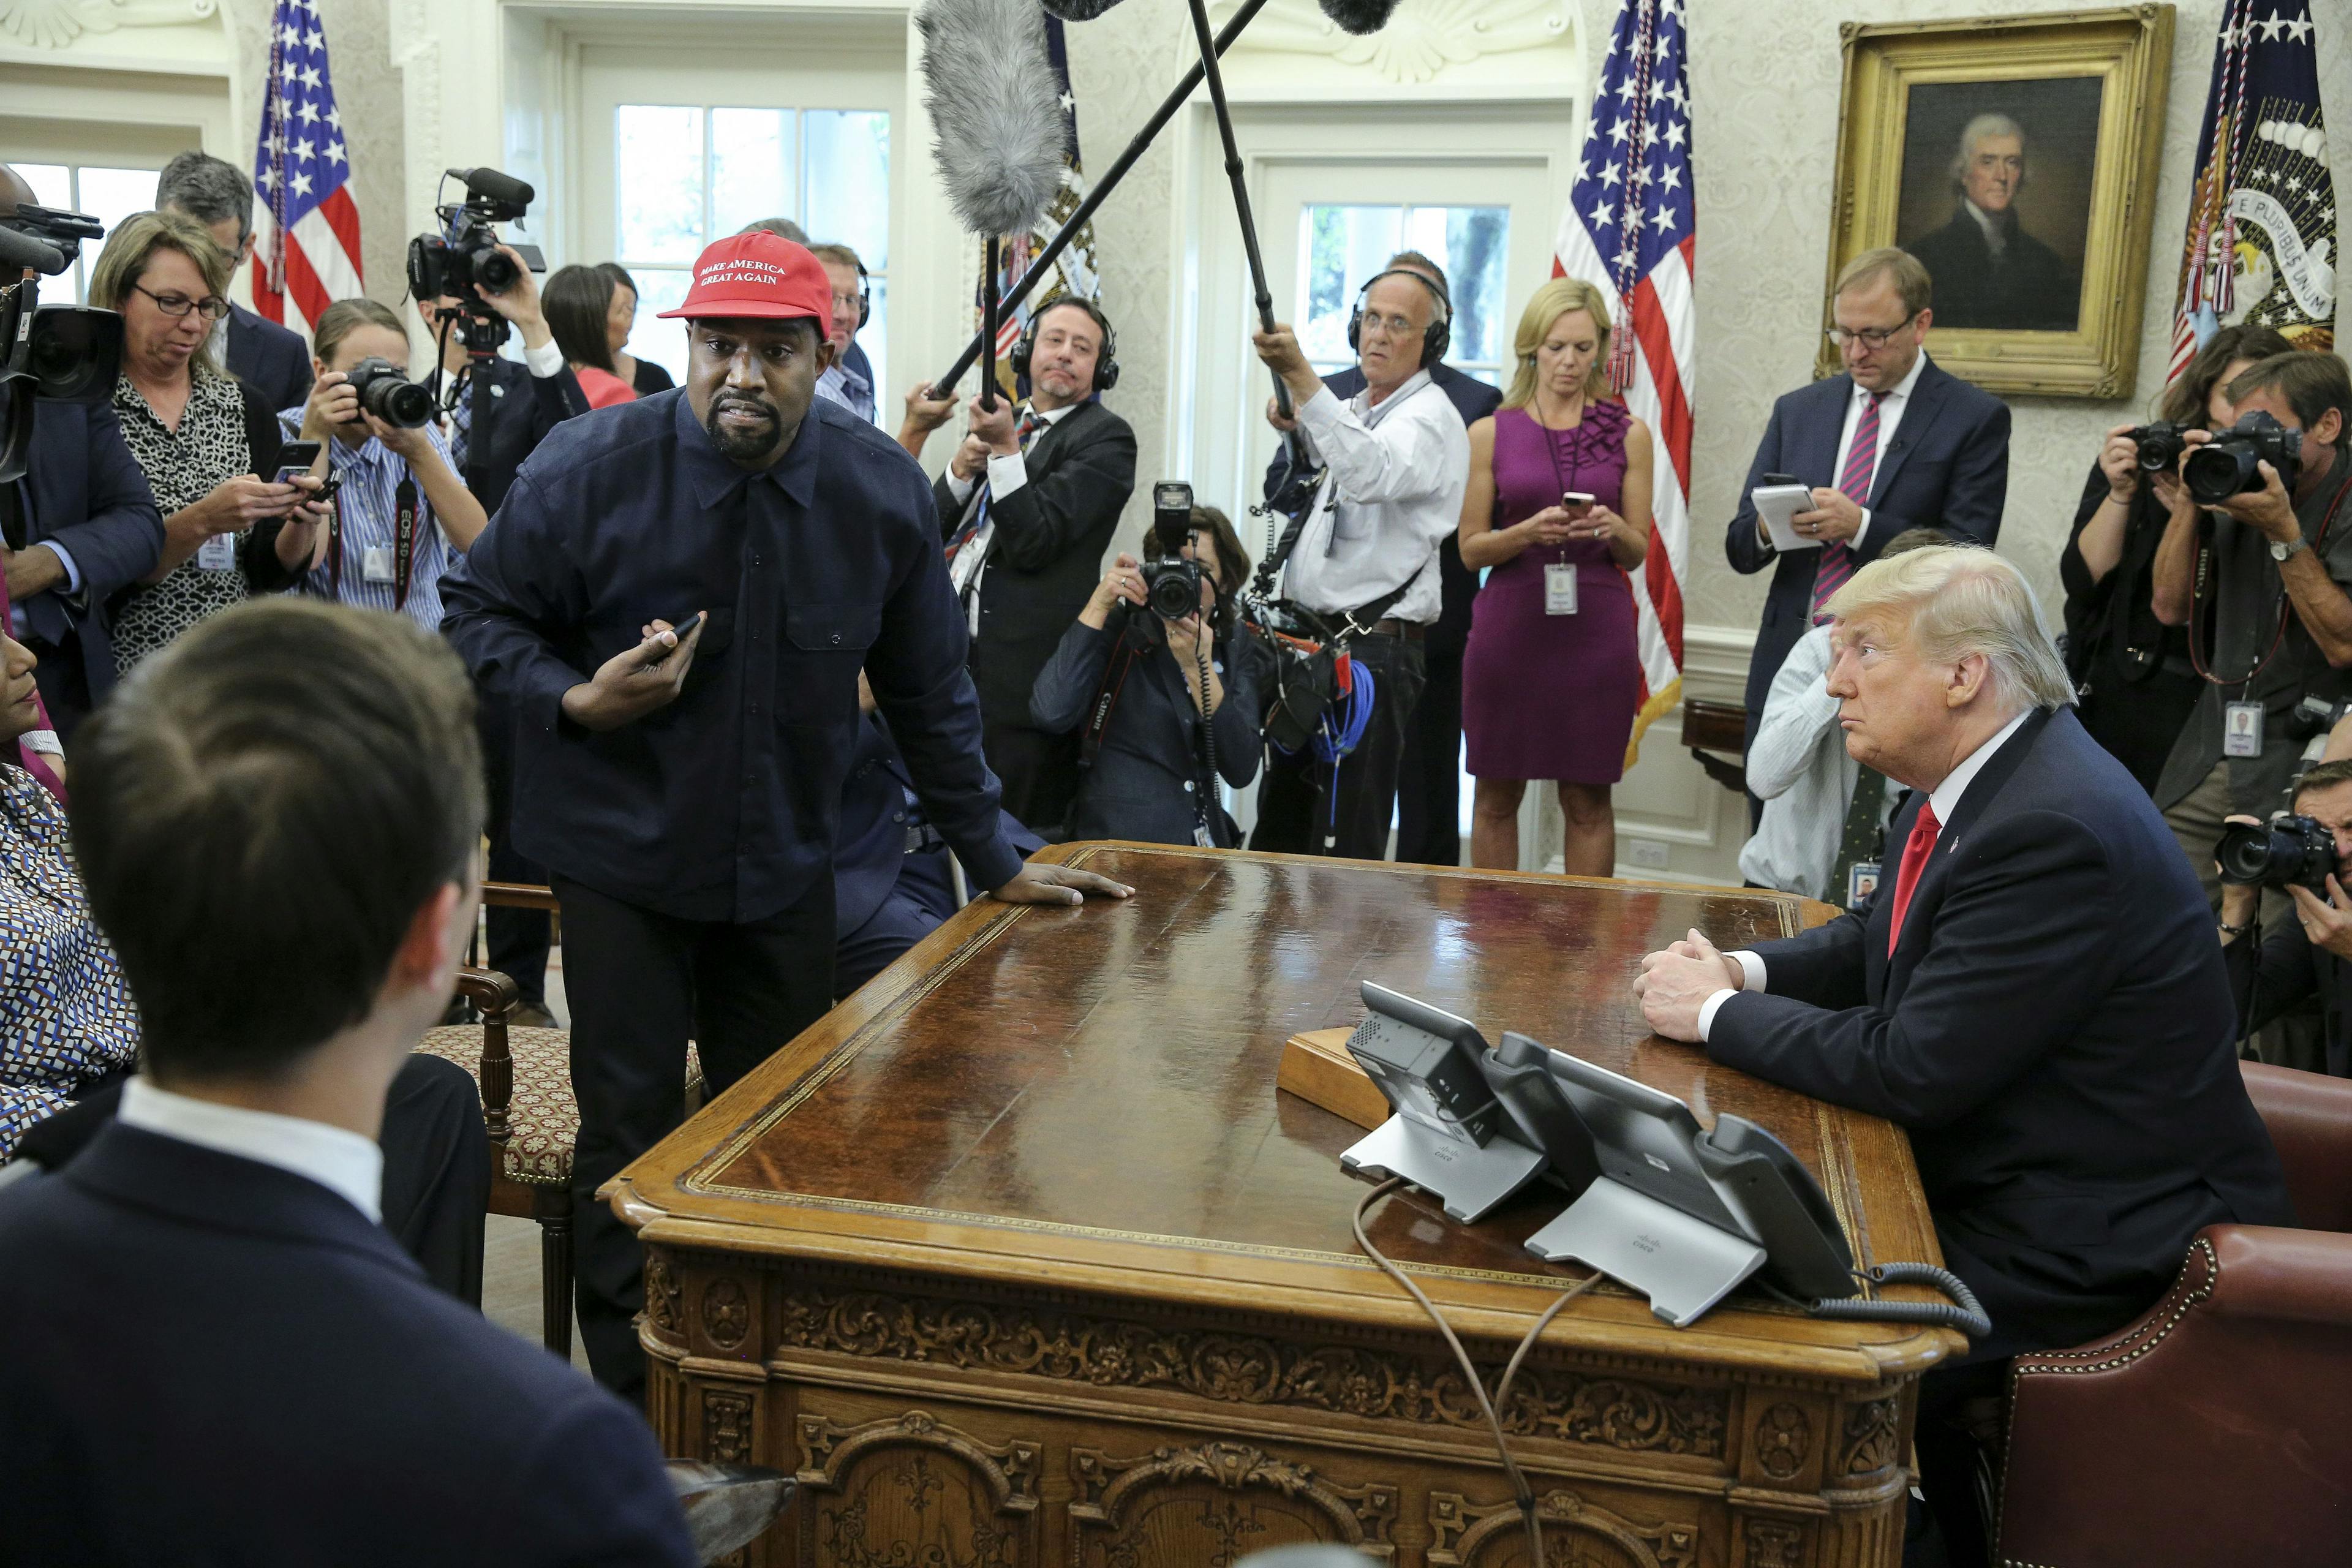 Rapper Kanye West stands up as he speaks during a meeting with U.S. President Donald Trump in the Oval office of the White House on October 11, 2018 in Washington, DC. (Photo by Oliver Contreras - Pool/Getty Images)